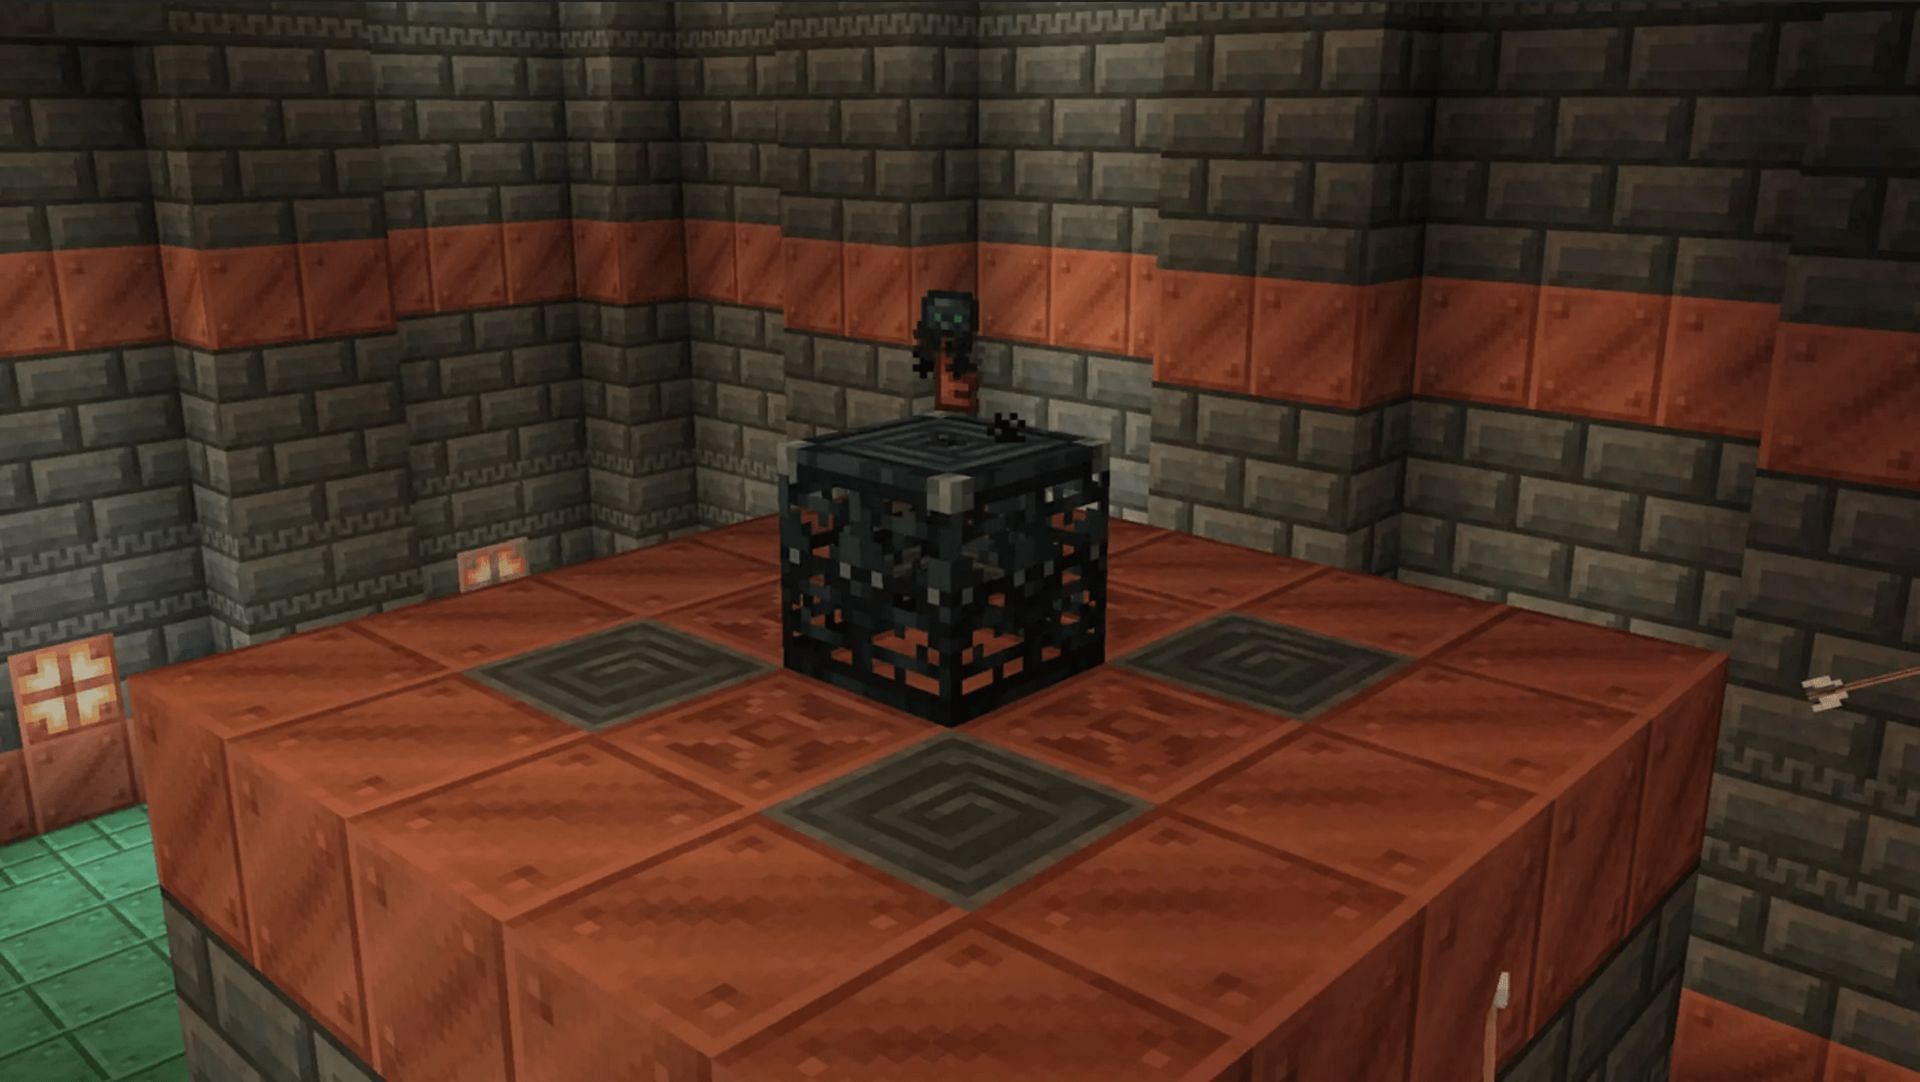 Trial keys are one reward for defeating trial spawners in Minecraft 1.21 (Image via Mojang)